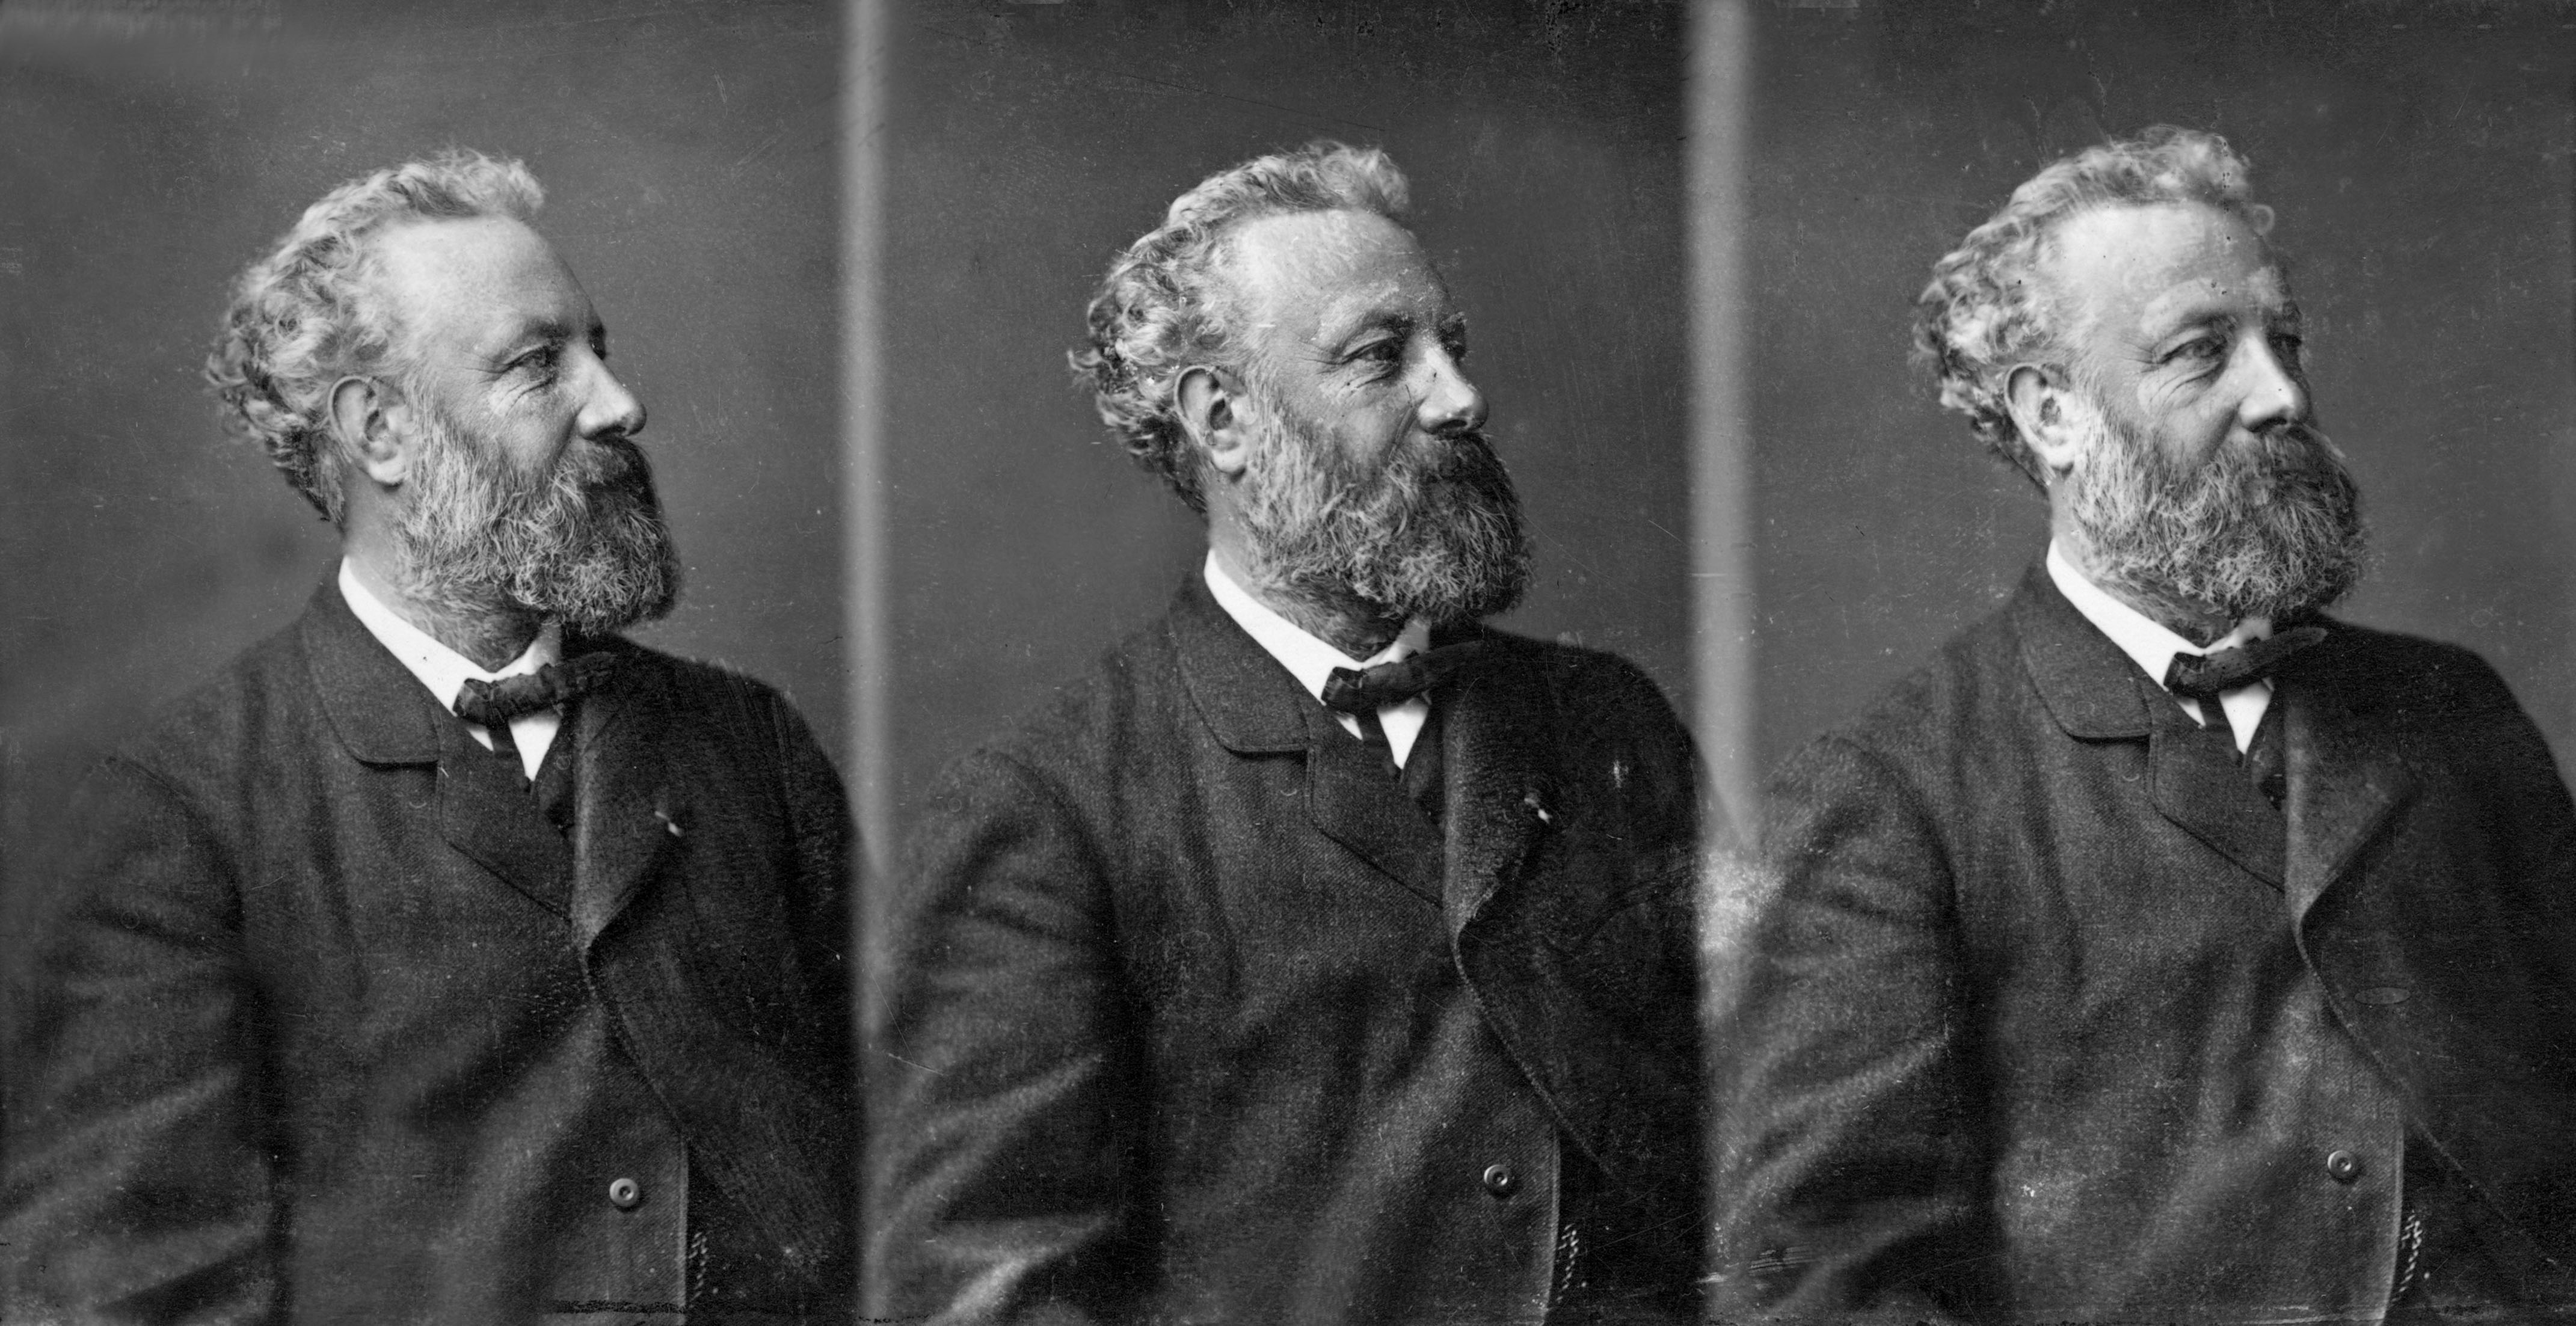 UNSPECIFIED - MARCH 18: writer Jules Verne (1828-1905) in 1875 (Photo by Apic/Getty Images)